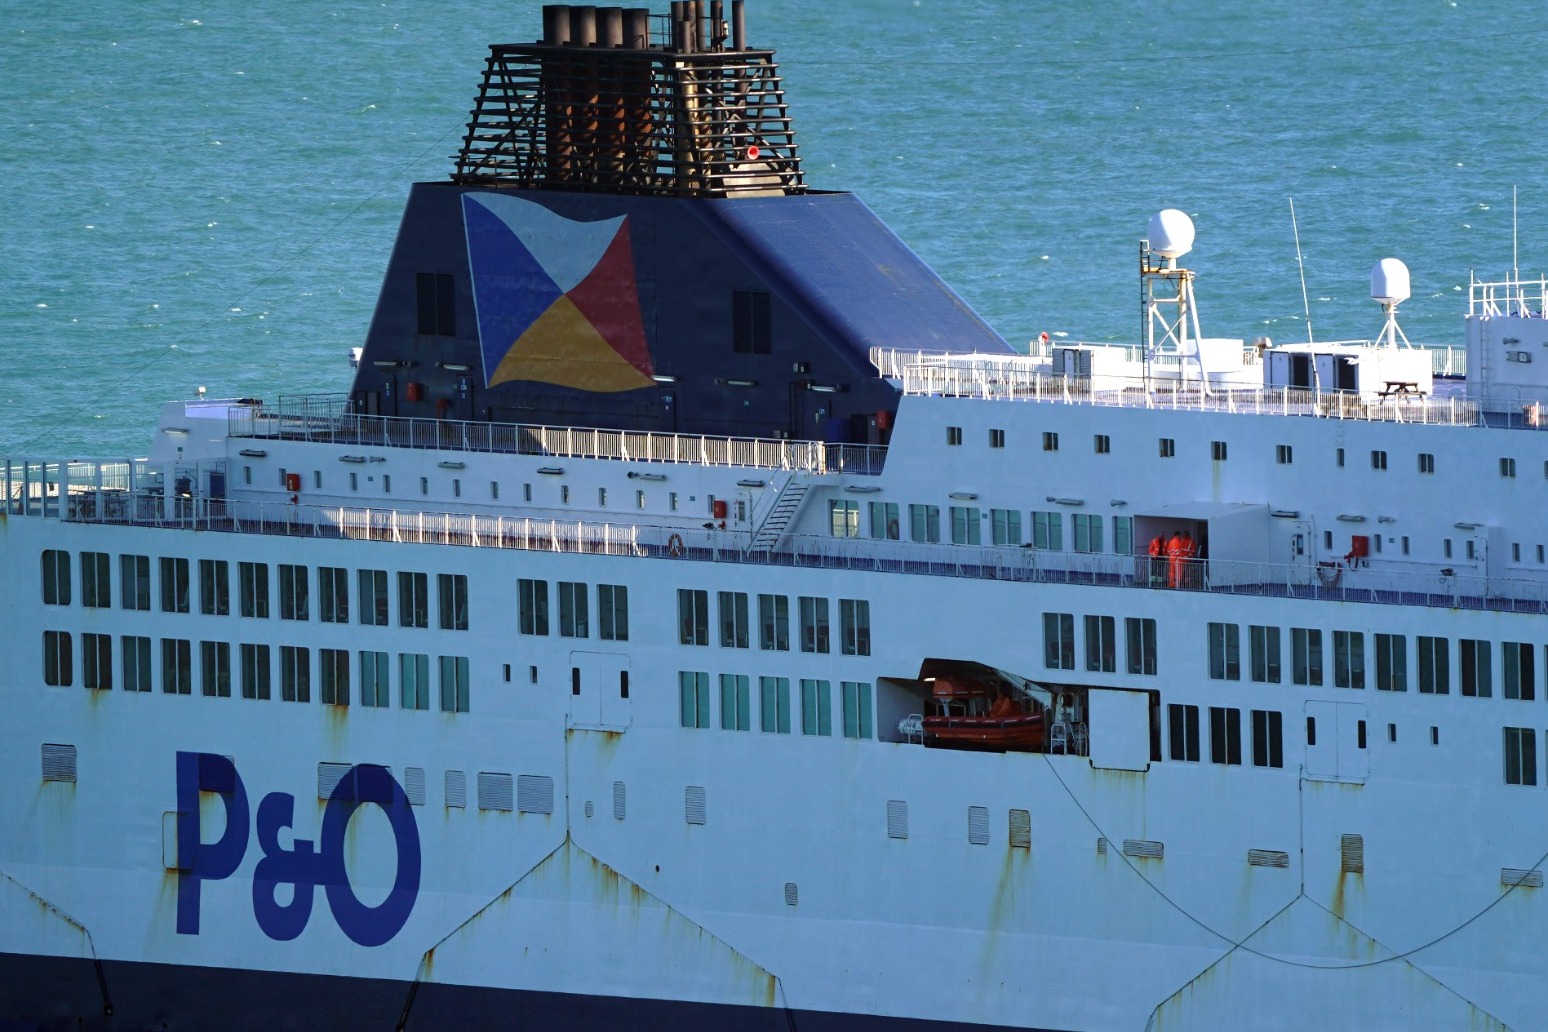 Government should declare if P&O broke the law sacking workers, says Labour 